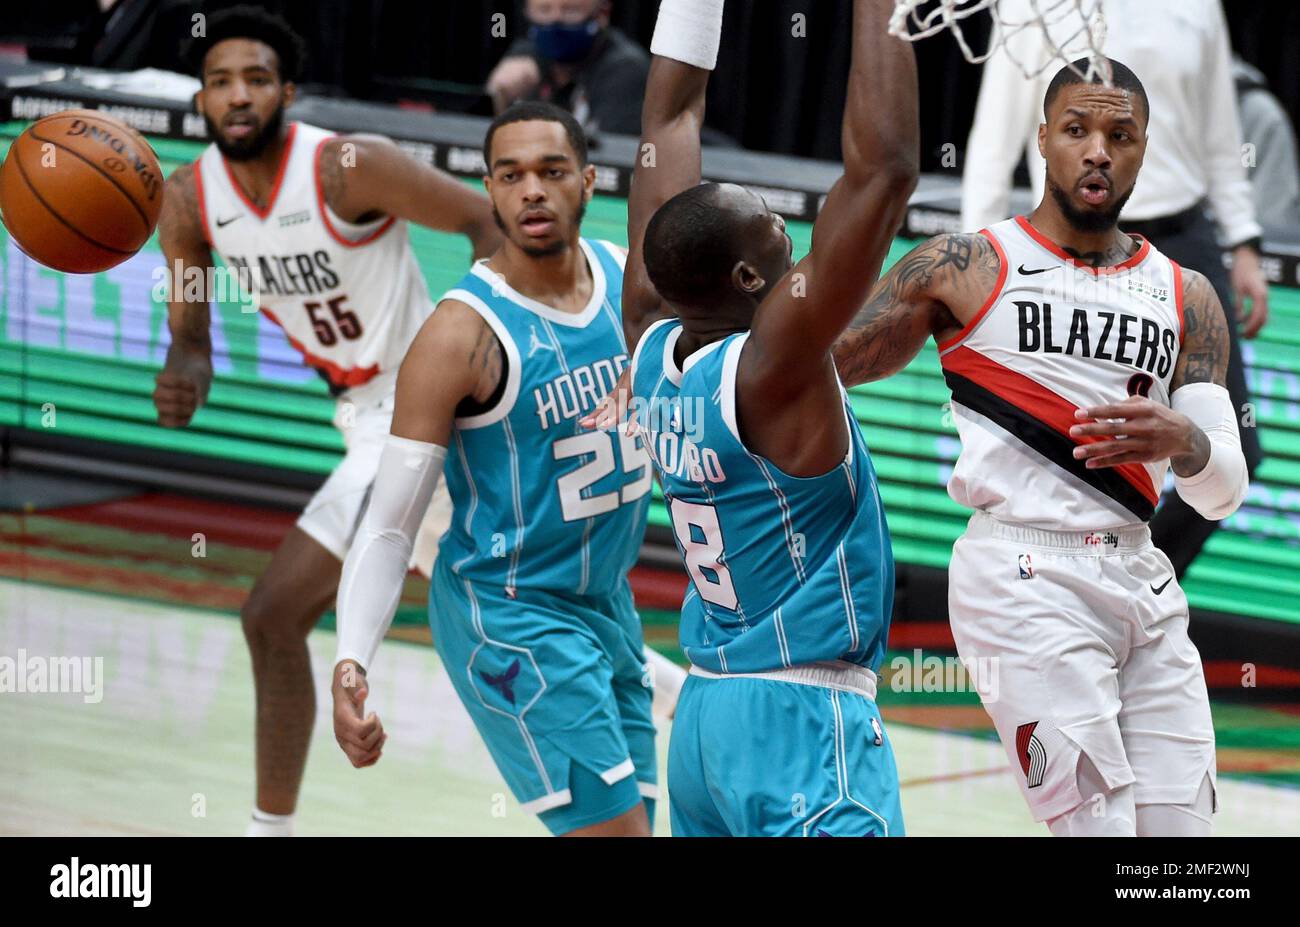 Portland Trail Blazers guard Damian Lillard, right, passes the ball over Charlotte Hornets center Bismack Biyombo, second from right, as Hornets forward P.J